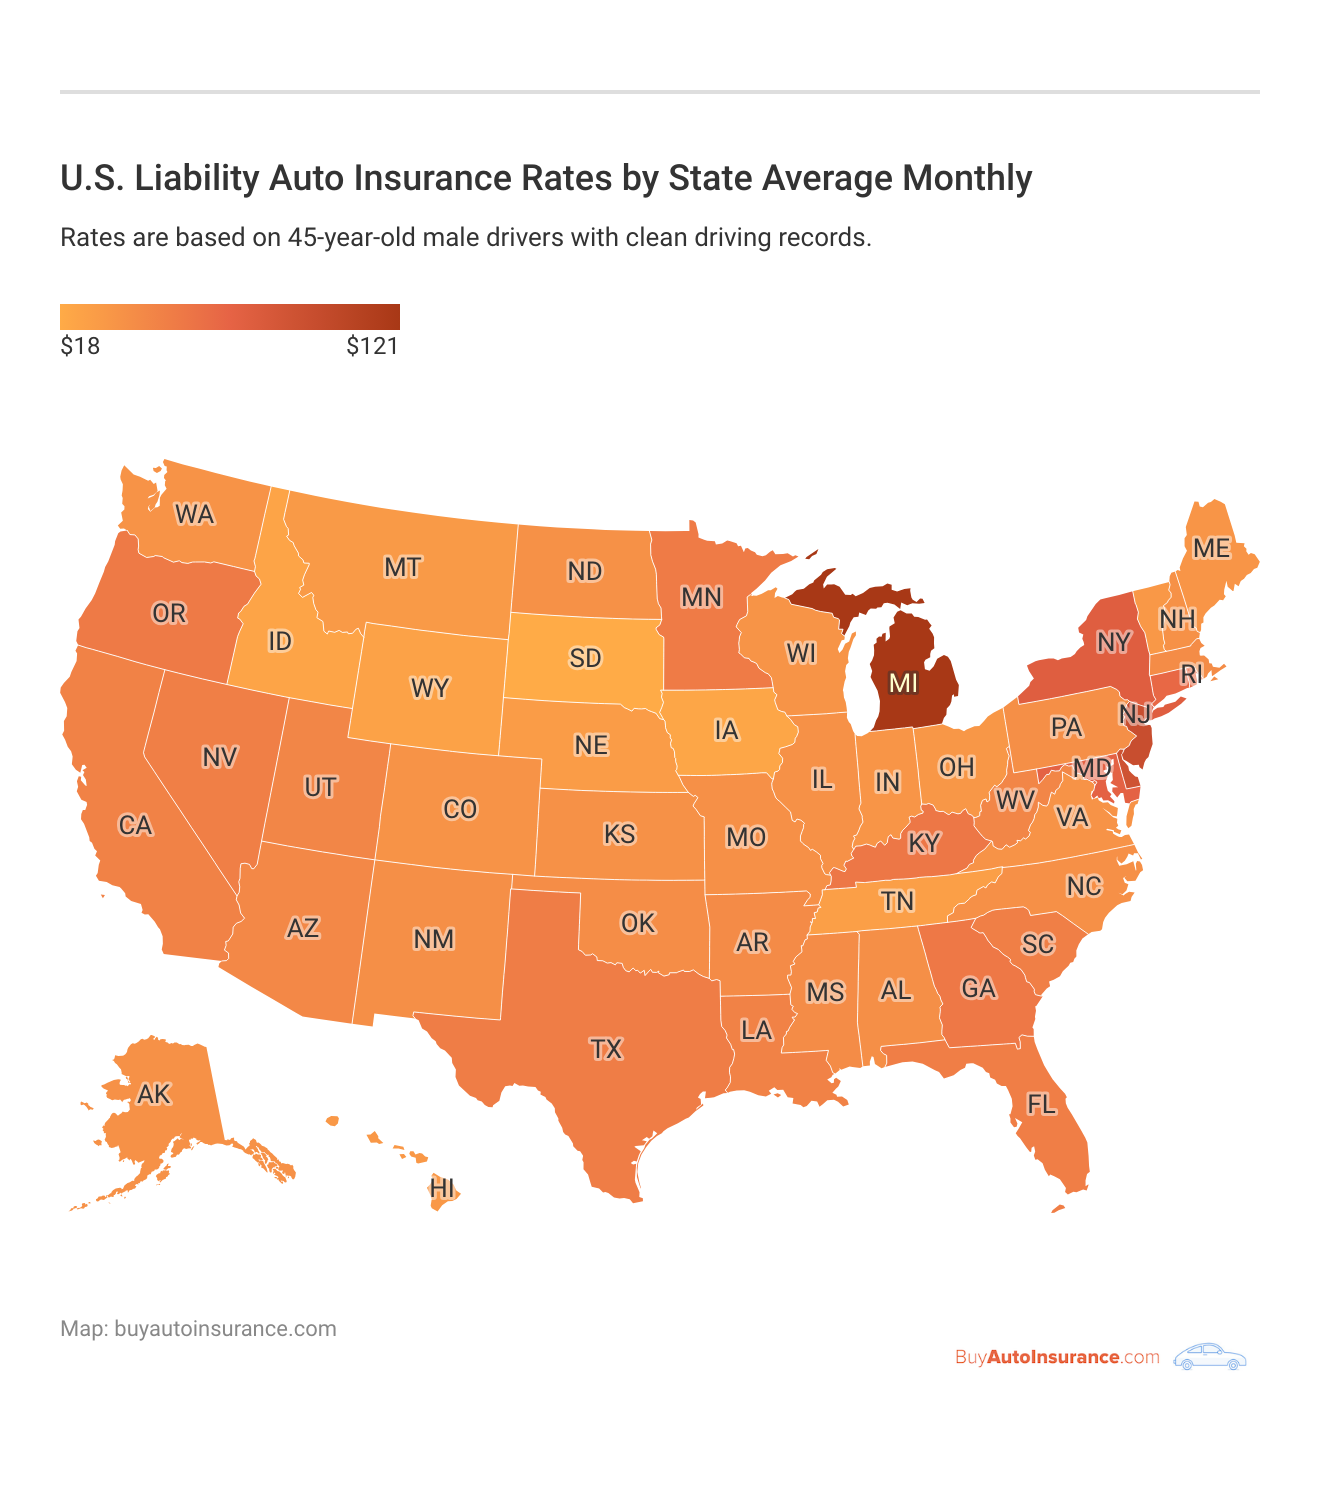 <h3>U.S. Liability Auto Insurance Rates by State Average Monthly</h3>